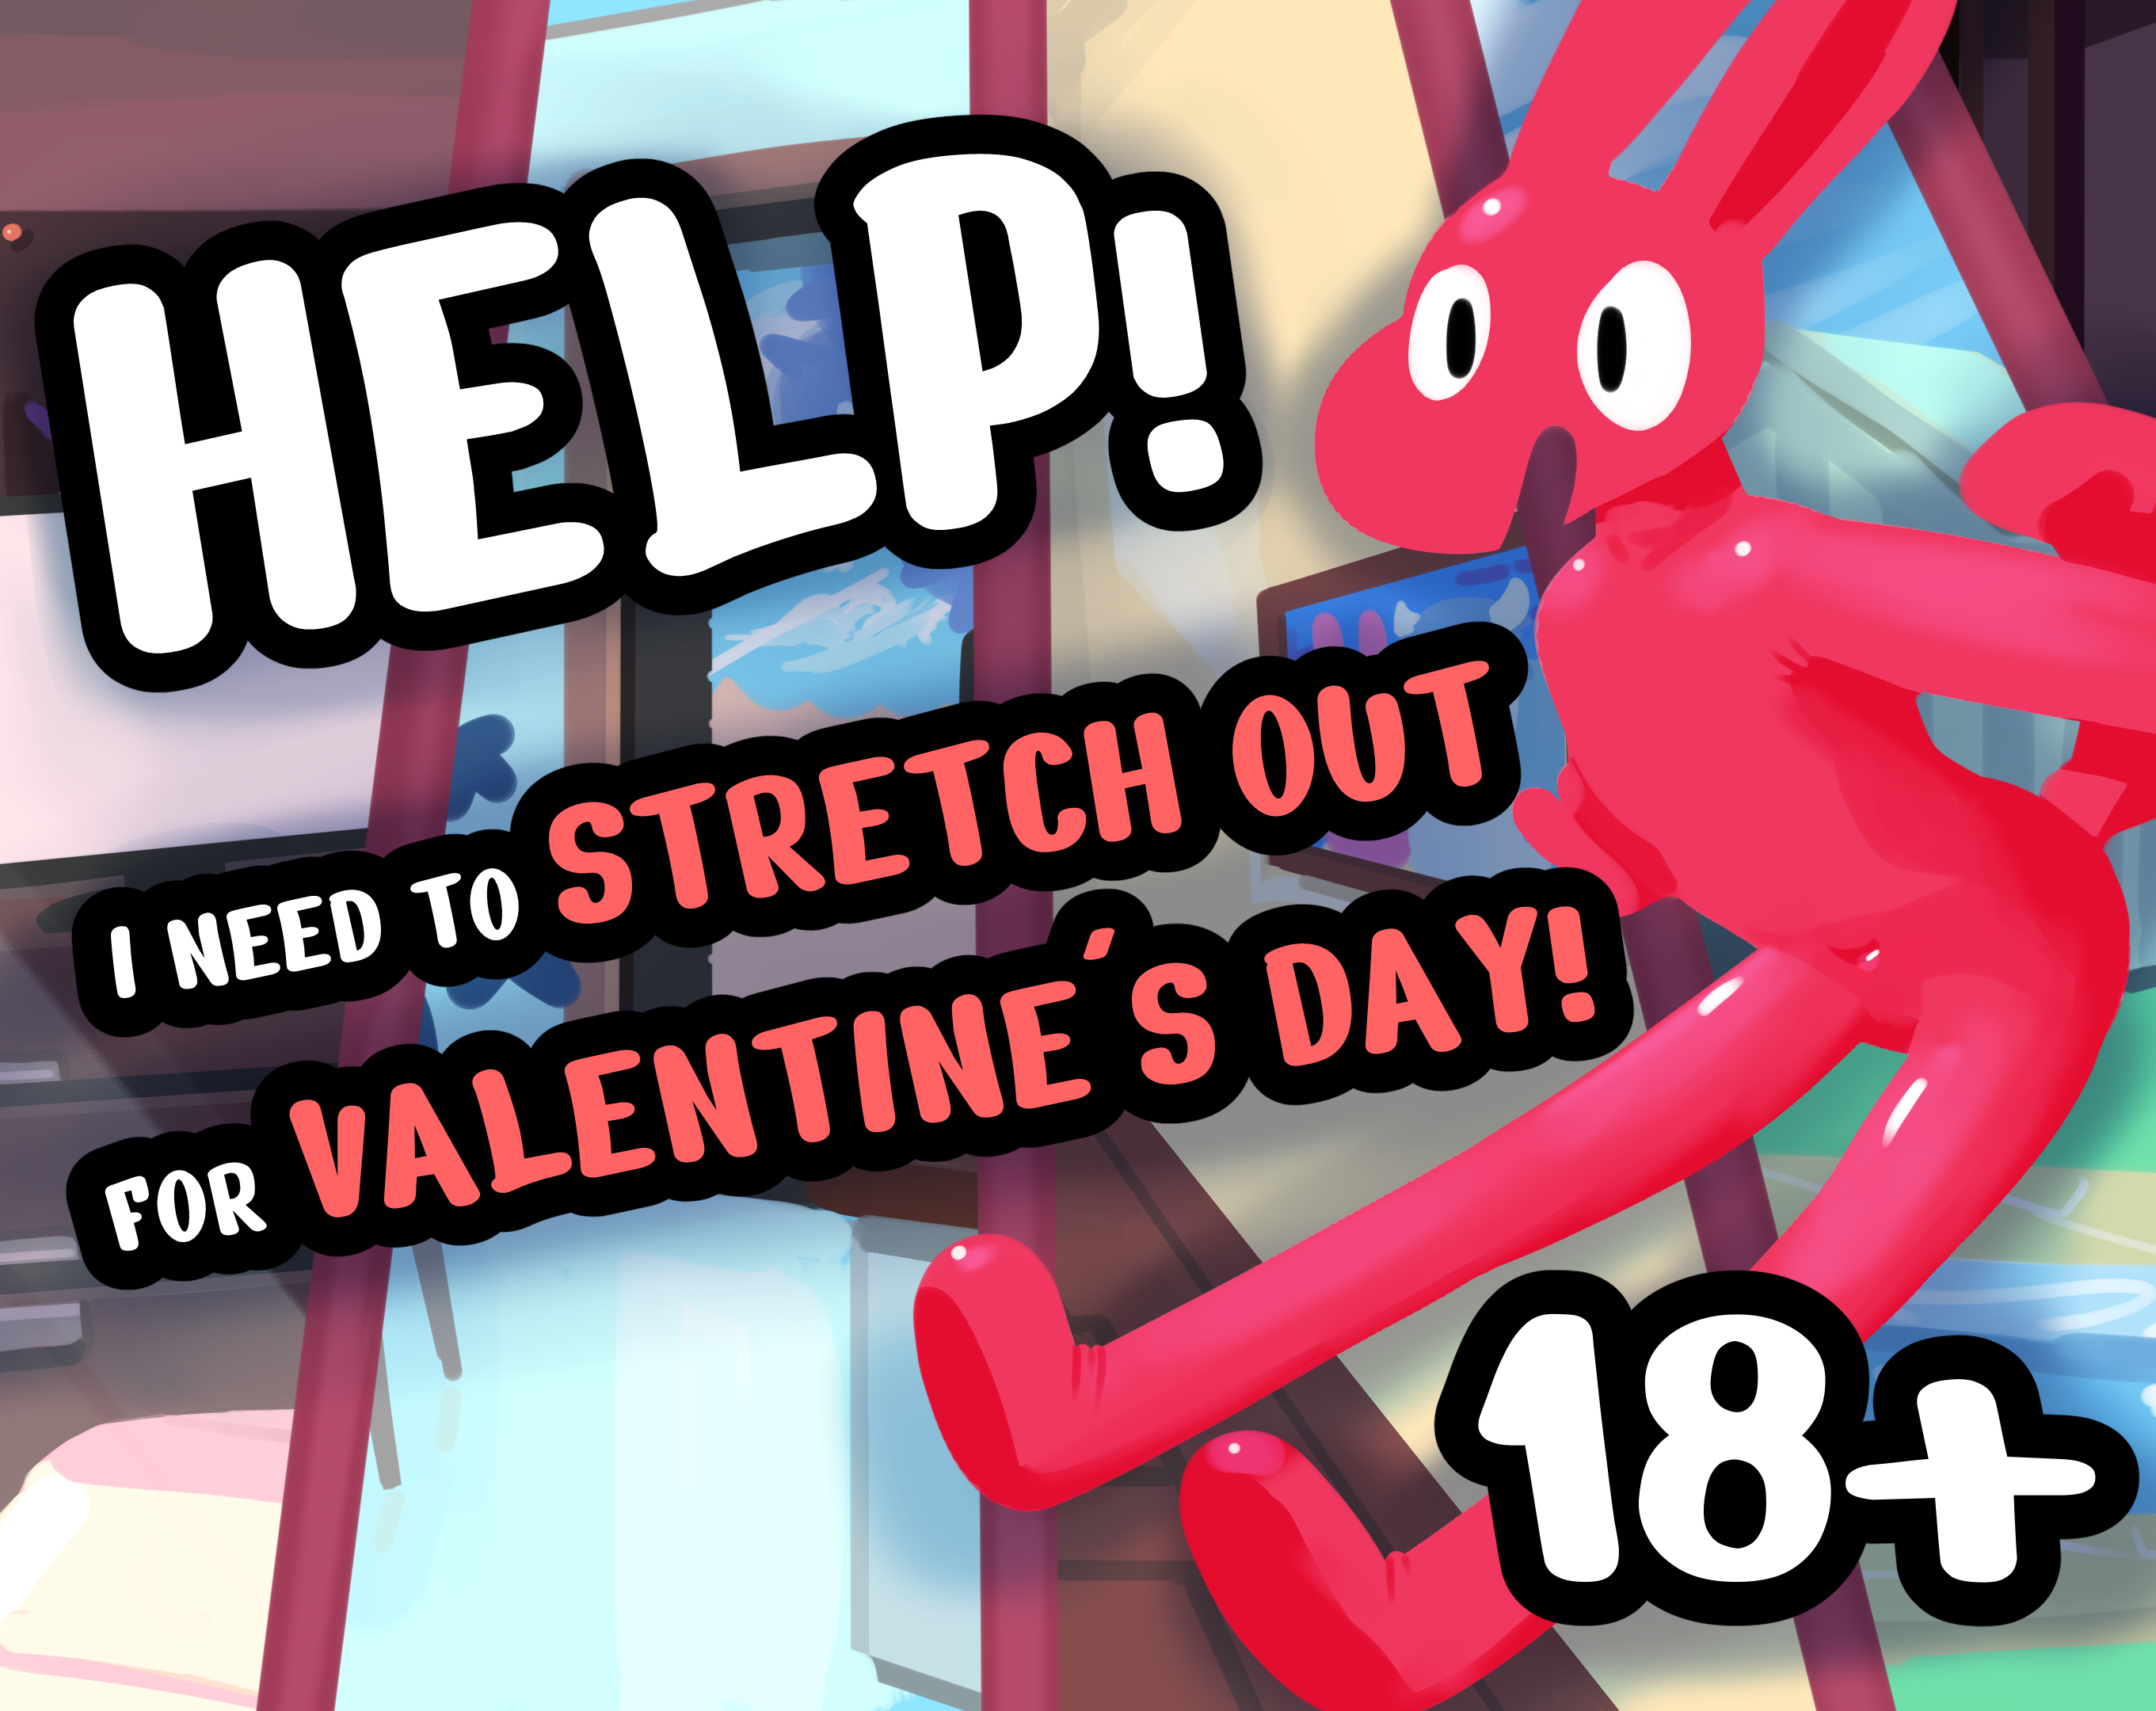 Help i need to stretch out for valentine's day